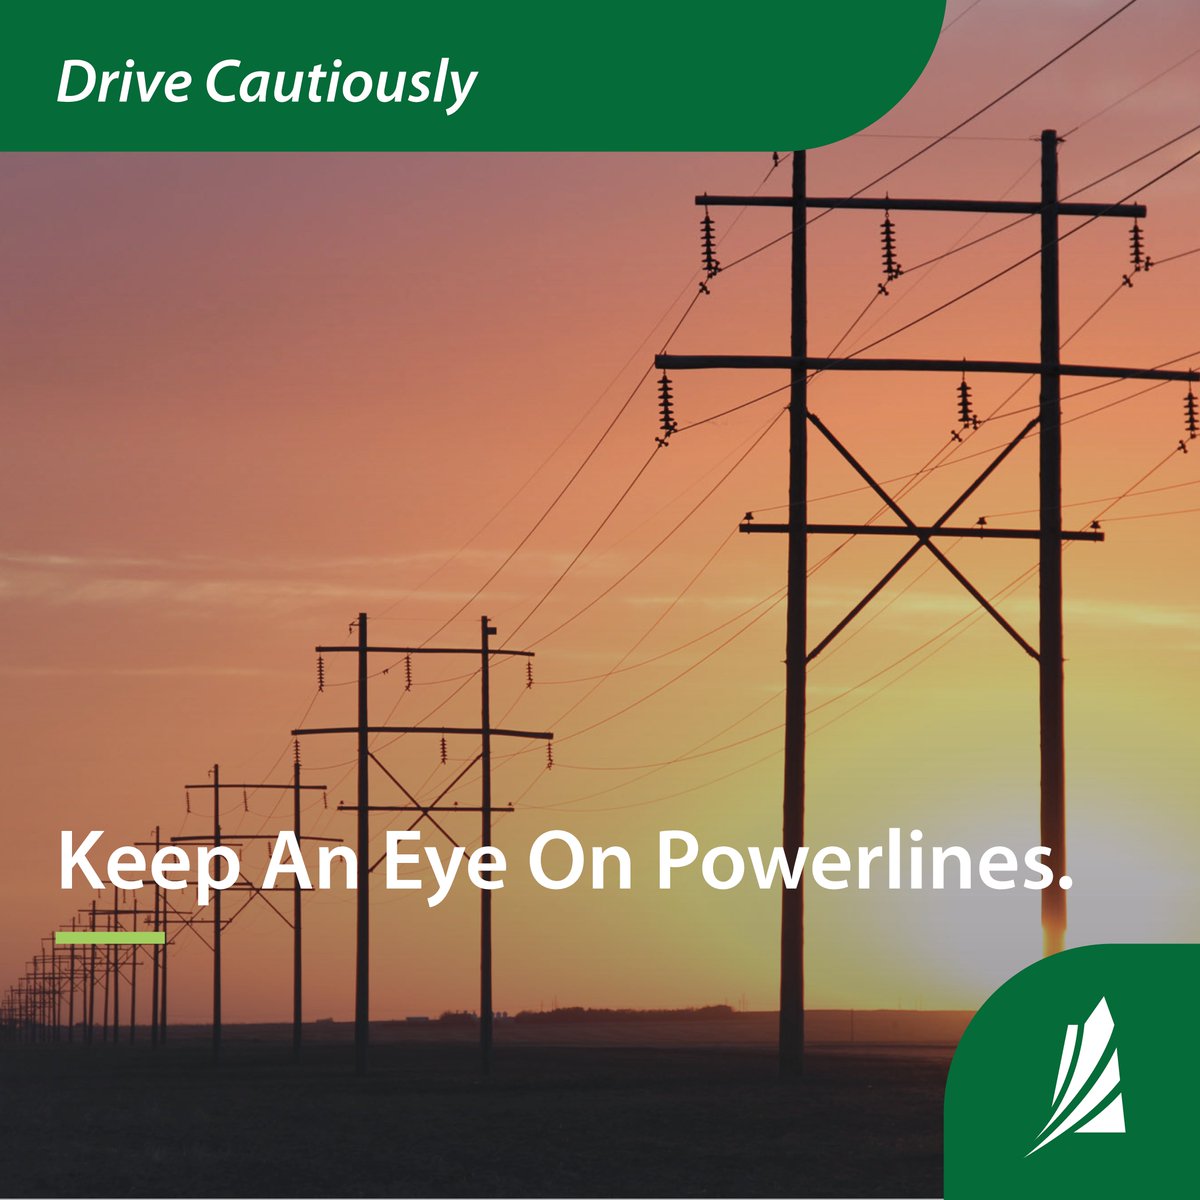 Lower large equipment when working near powerlines. Learn more from the experts at @SaskPower. saskpower.com/Safety/Electri… #FarmSafety #SaskAg